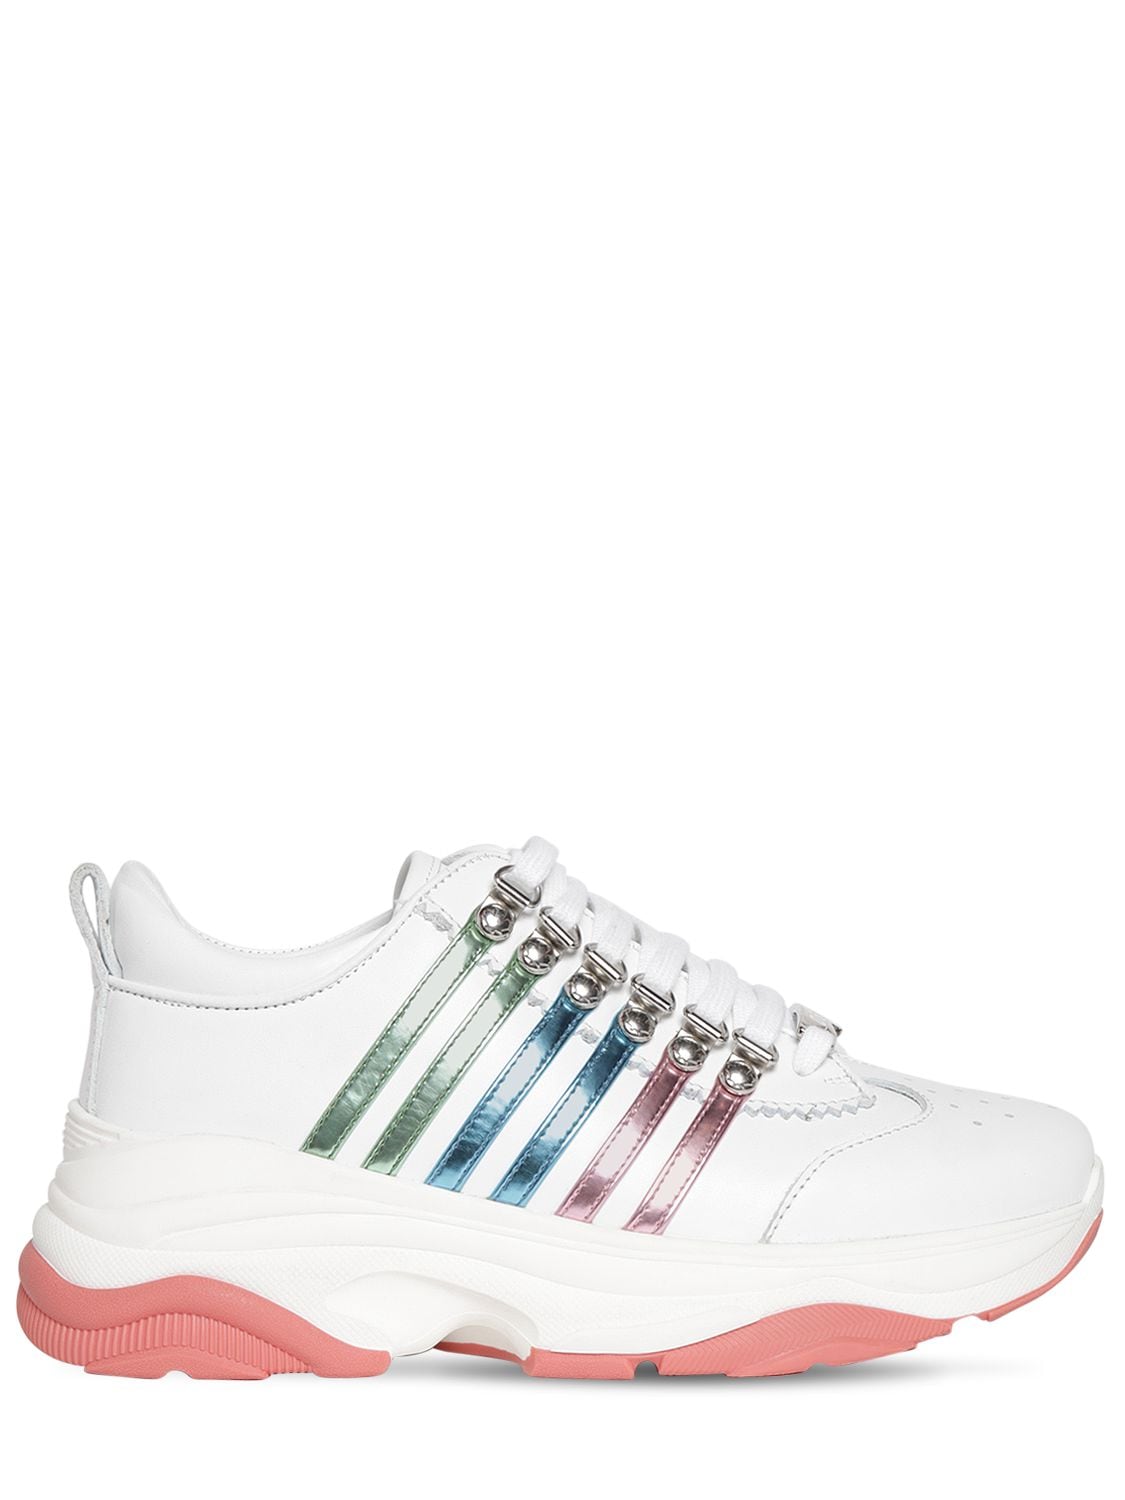 dsquared2 women's sneakers